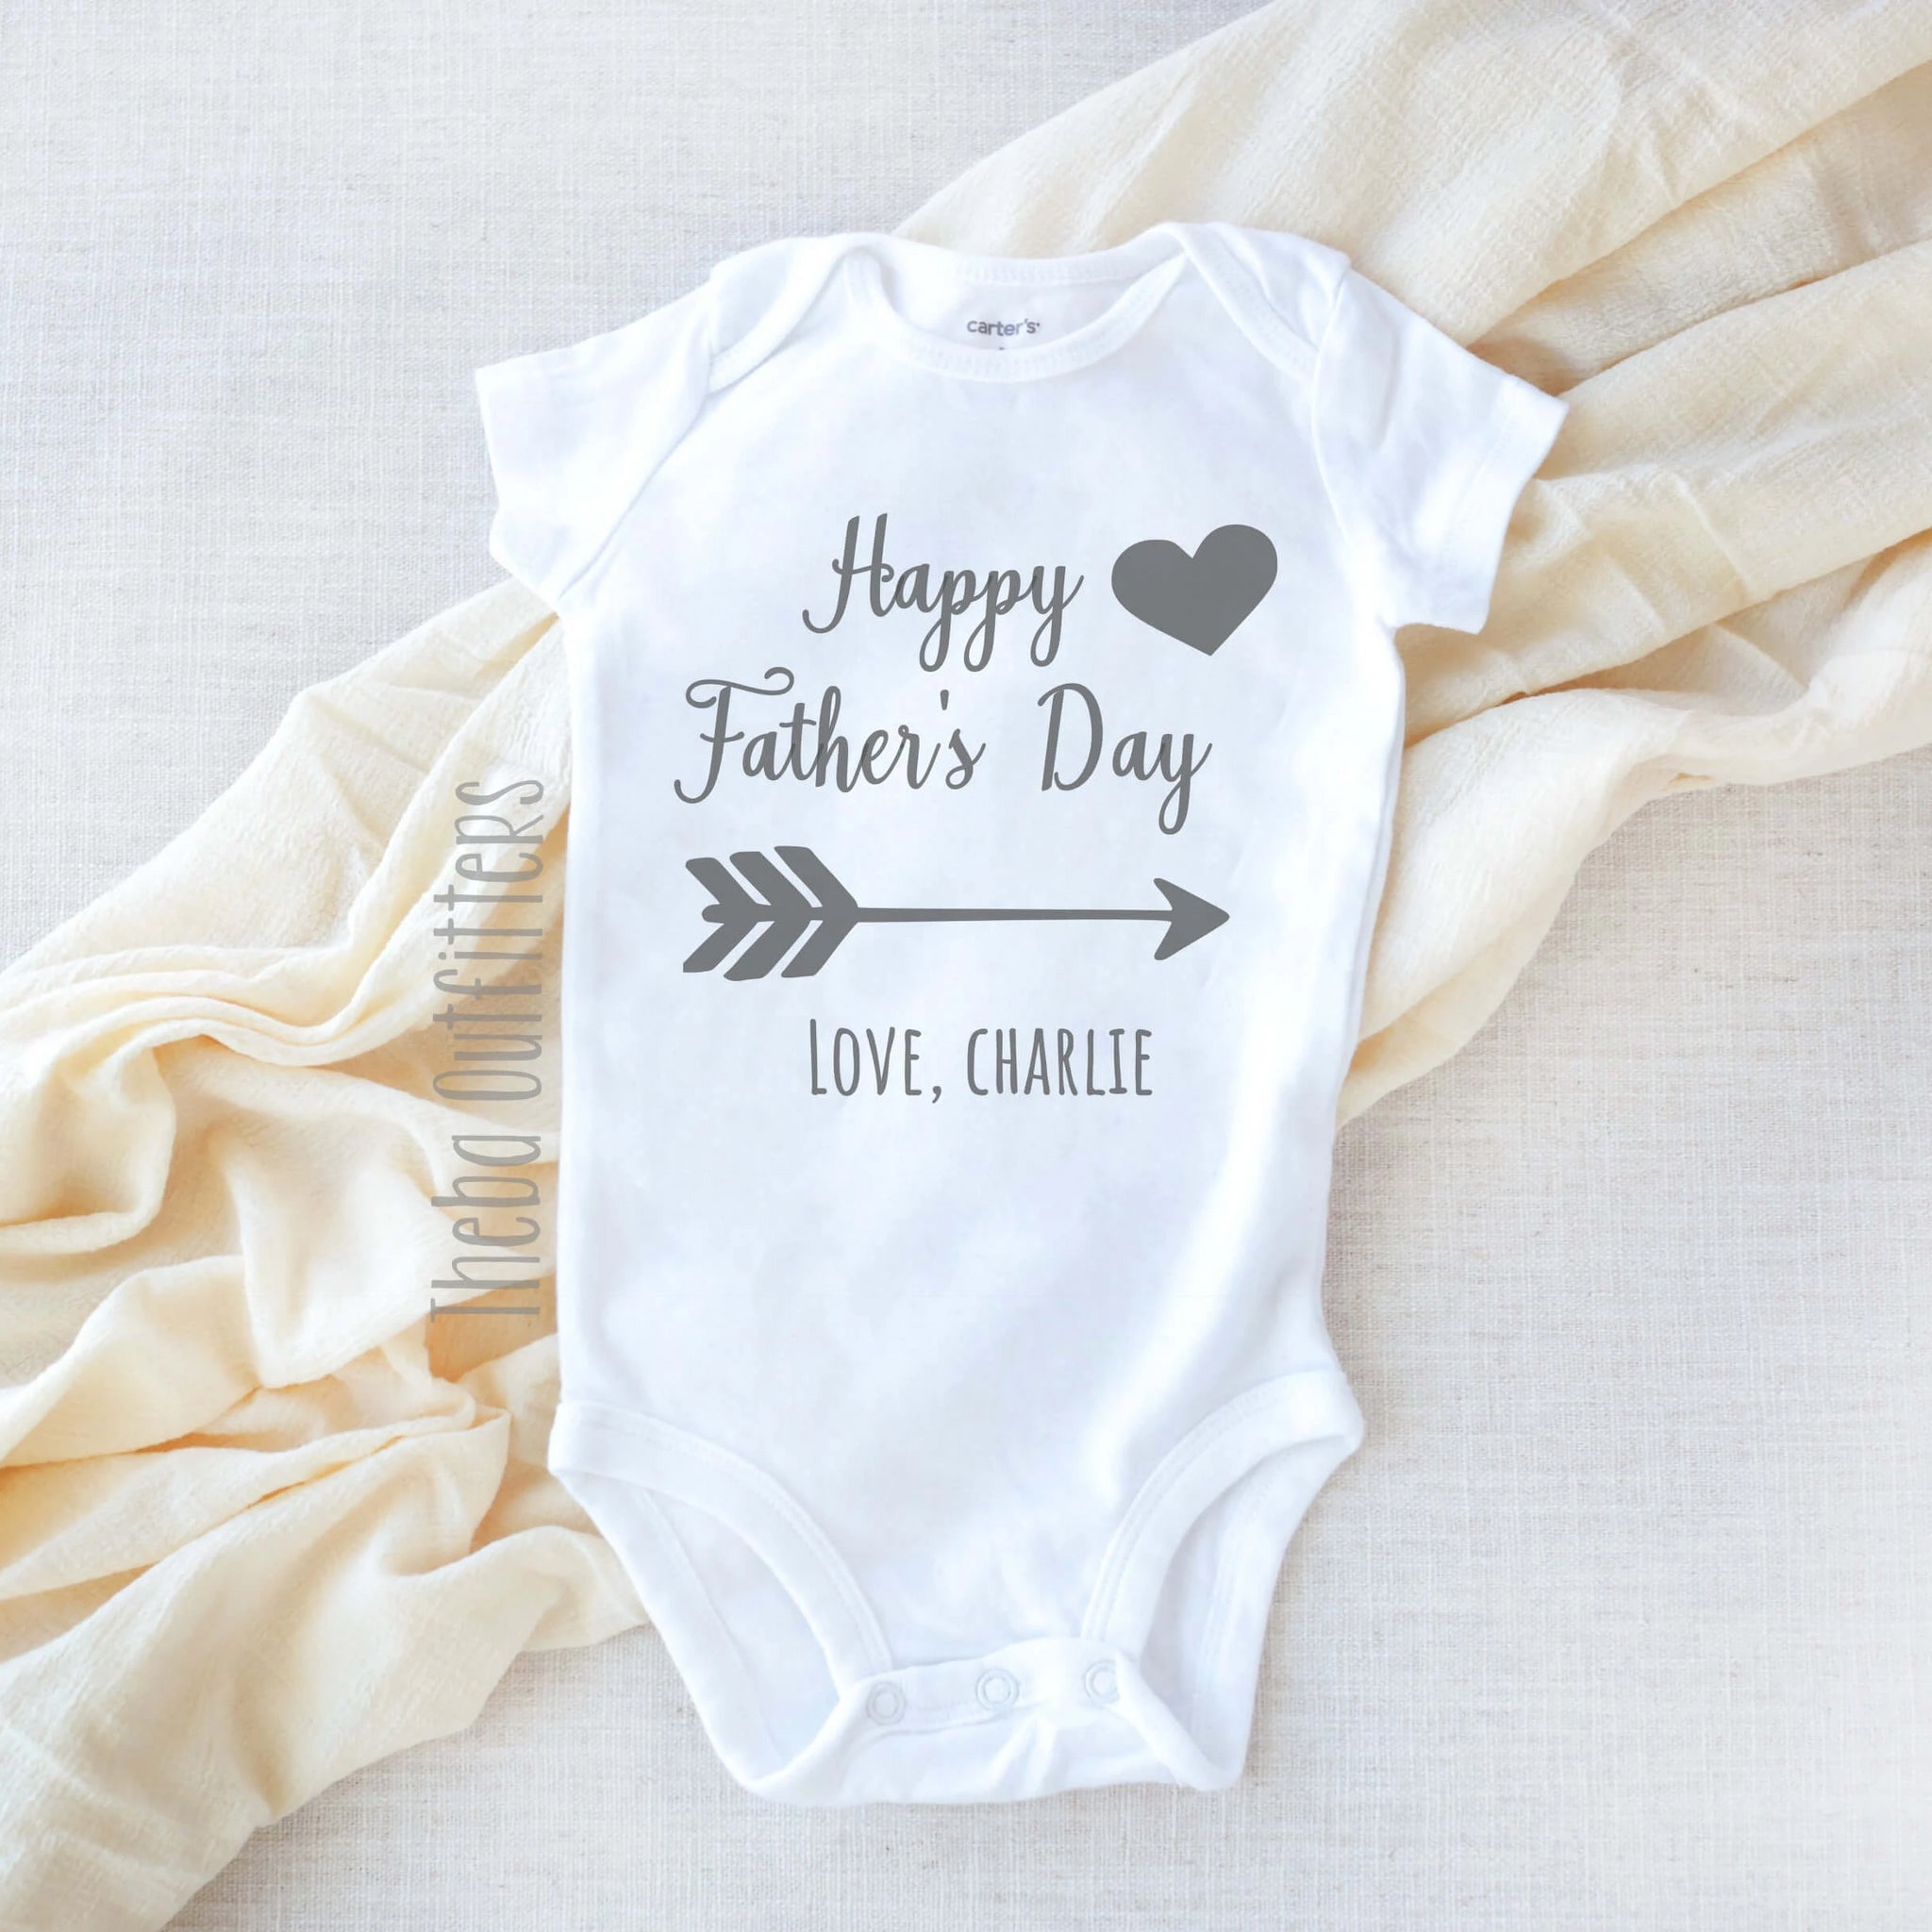 Happy Father's Day Personalized Baby Onesie Bodysuit Infant Theba Outfitters